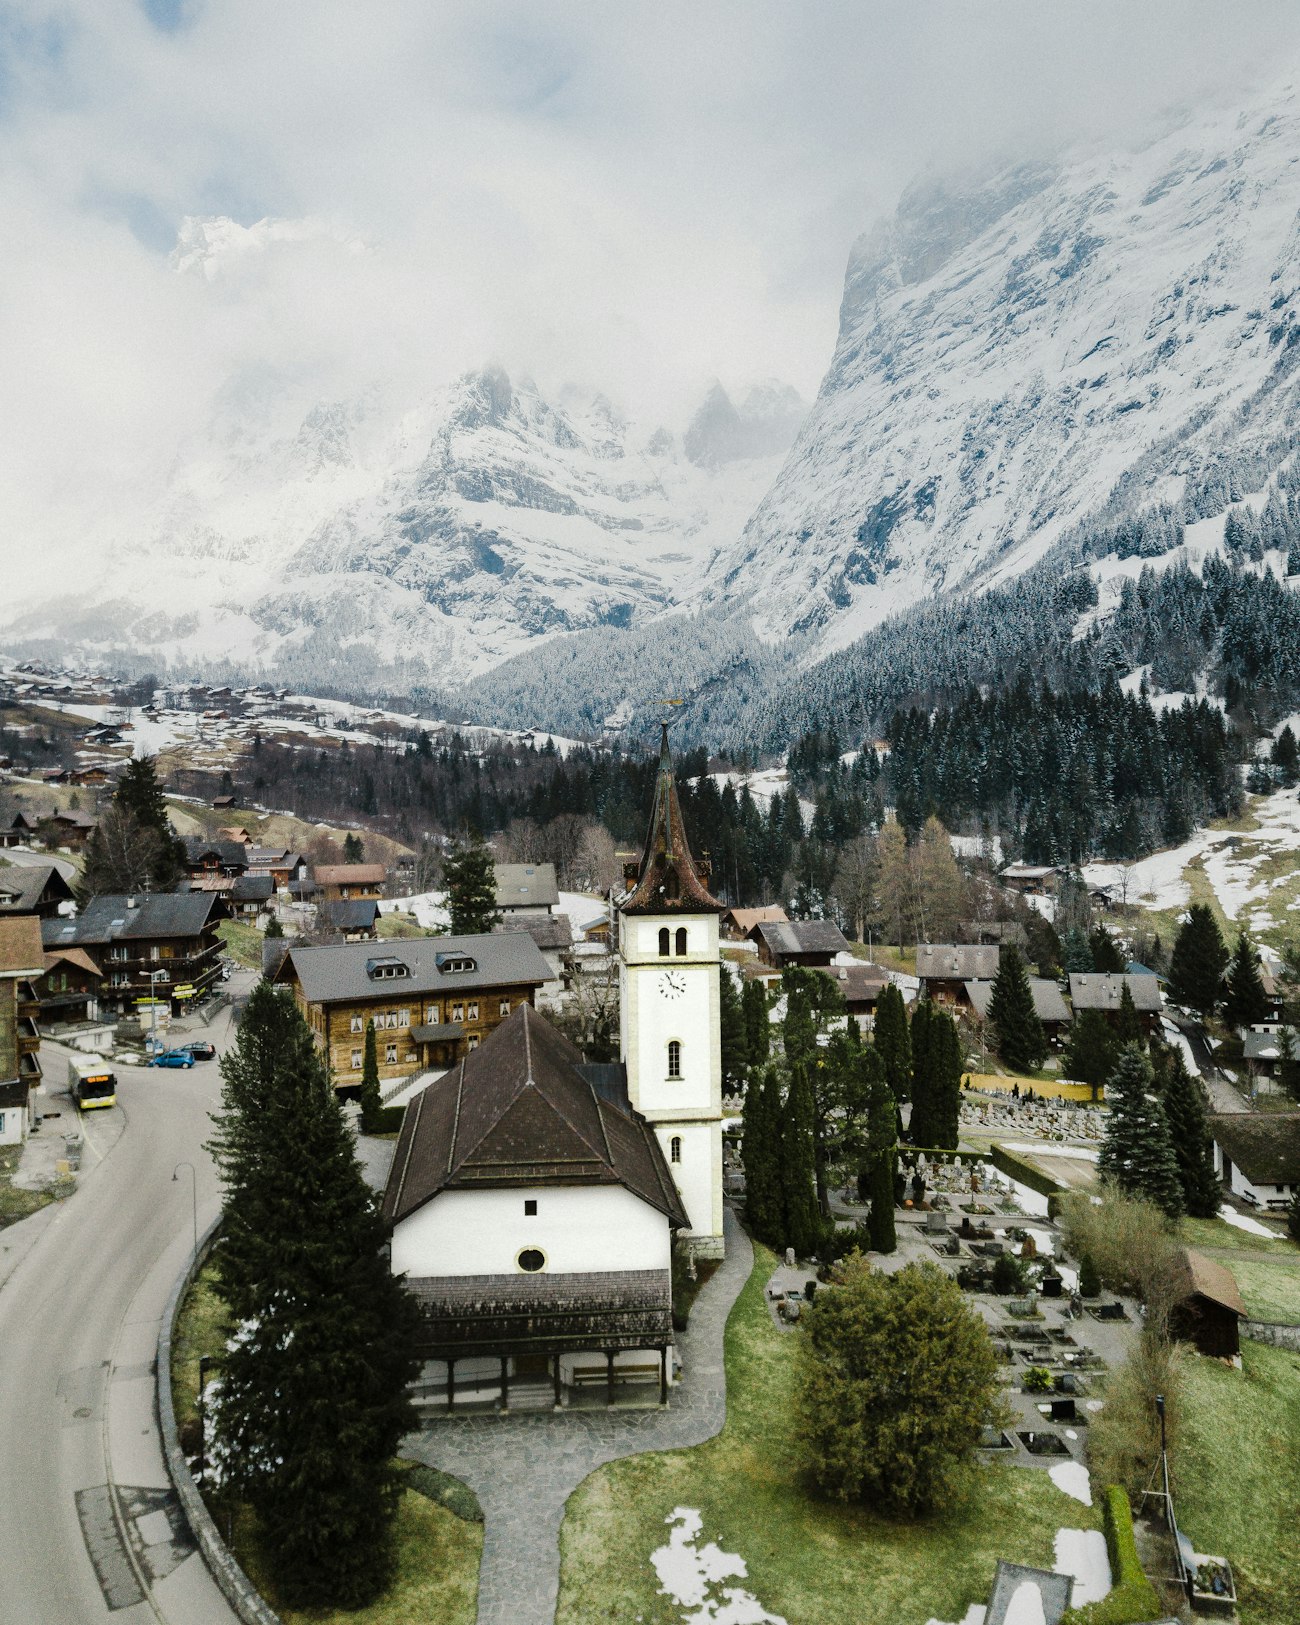 City of Pfingsten, Things to Do in Grindelwald